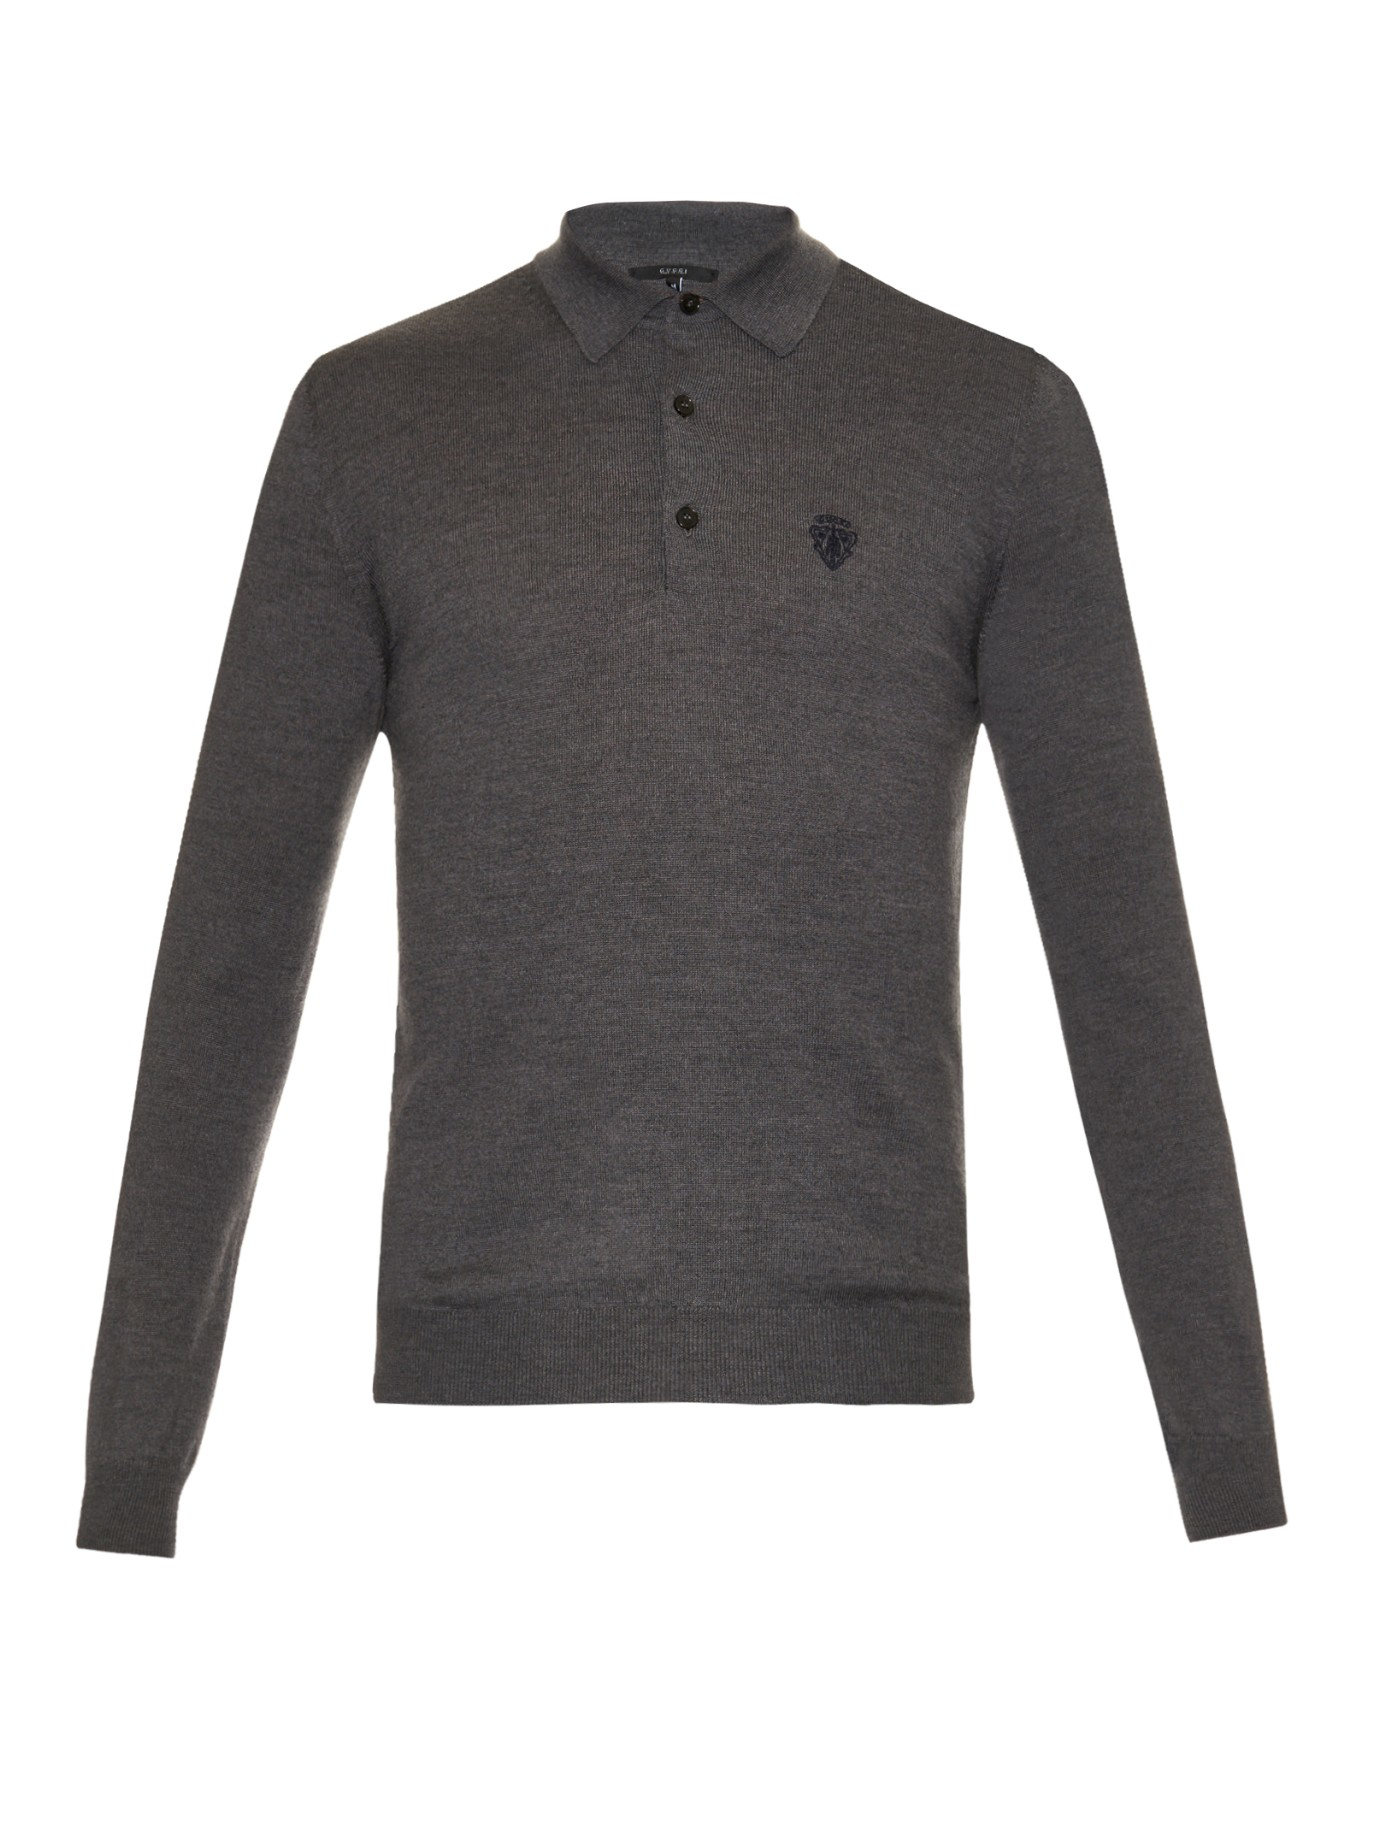 Gucci Long-Sleeved Wool Polo Shirt in Light (Gray) for Men - Lyst